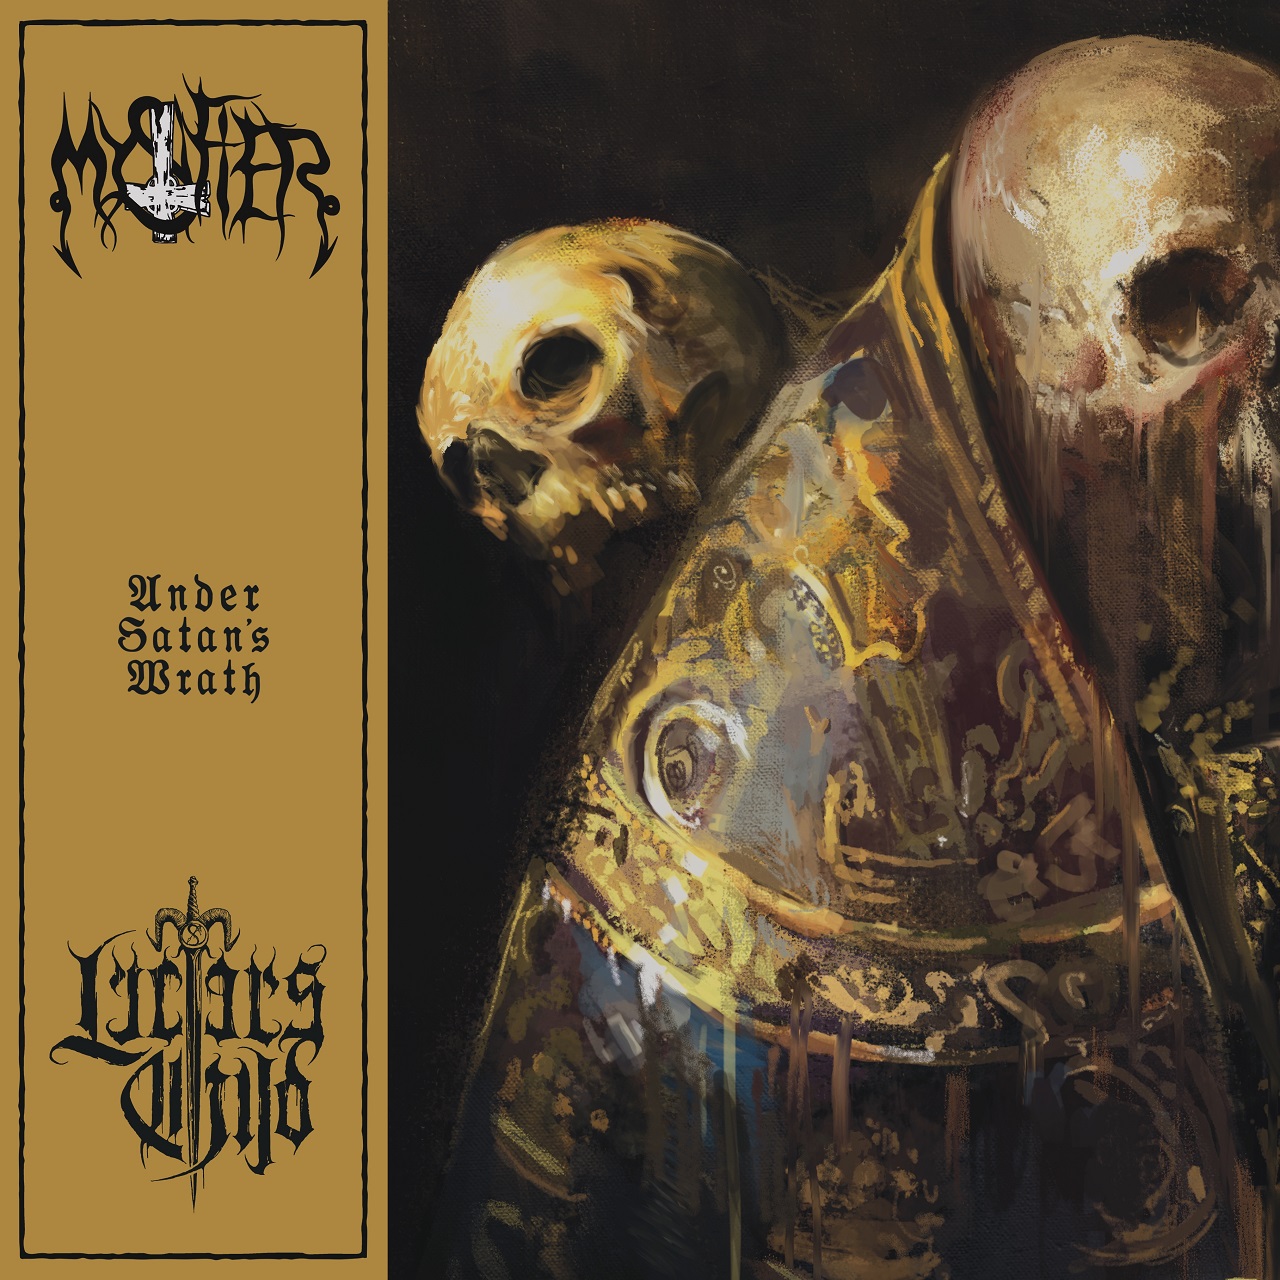 You are currently viewing LUCIFER’S CHILD and MYSTIFIER Announce Details Of Split Release.